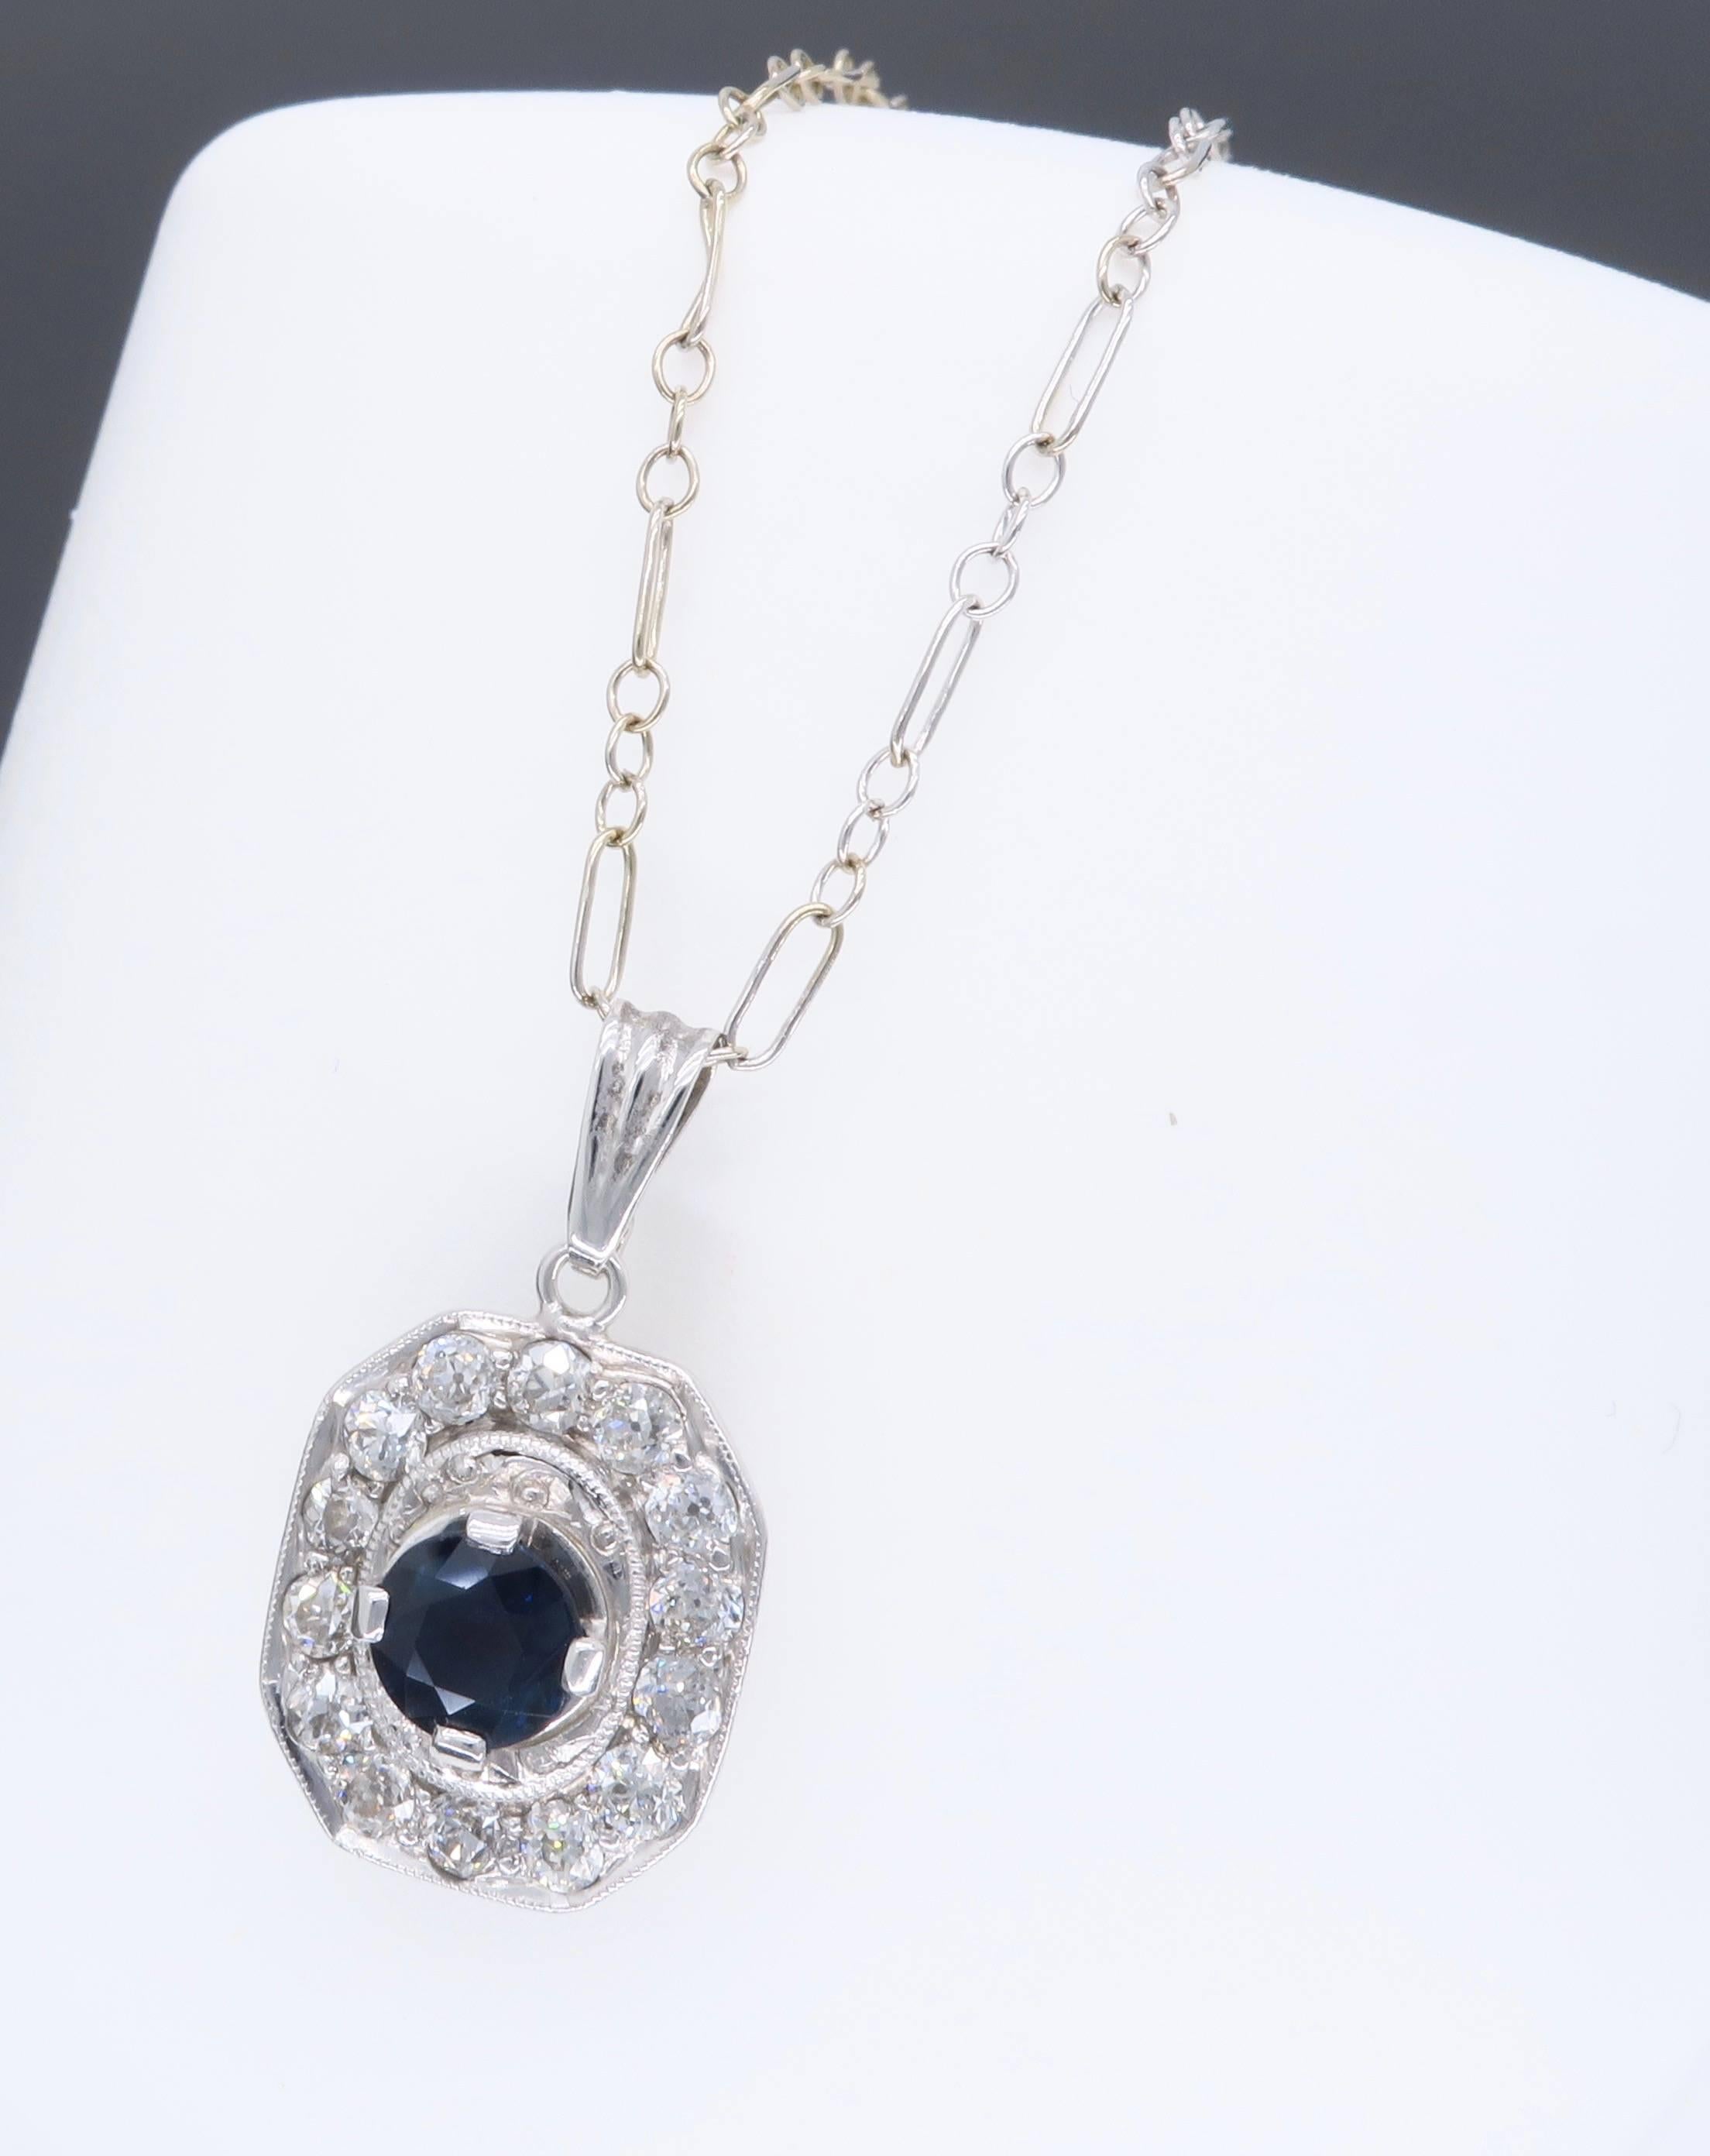 This Art Deco Platinum pendant features a dark blue 5.1MM Sapphire with 14 Old European Cut Diamonds surrounding it. There is approximately .55CTW of diamonds displaying an average color of F-H and average clarity of VS.  The 14K white gold chain is